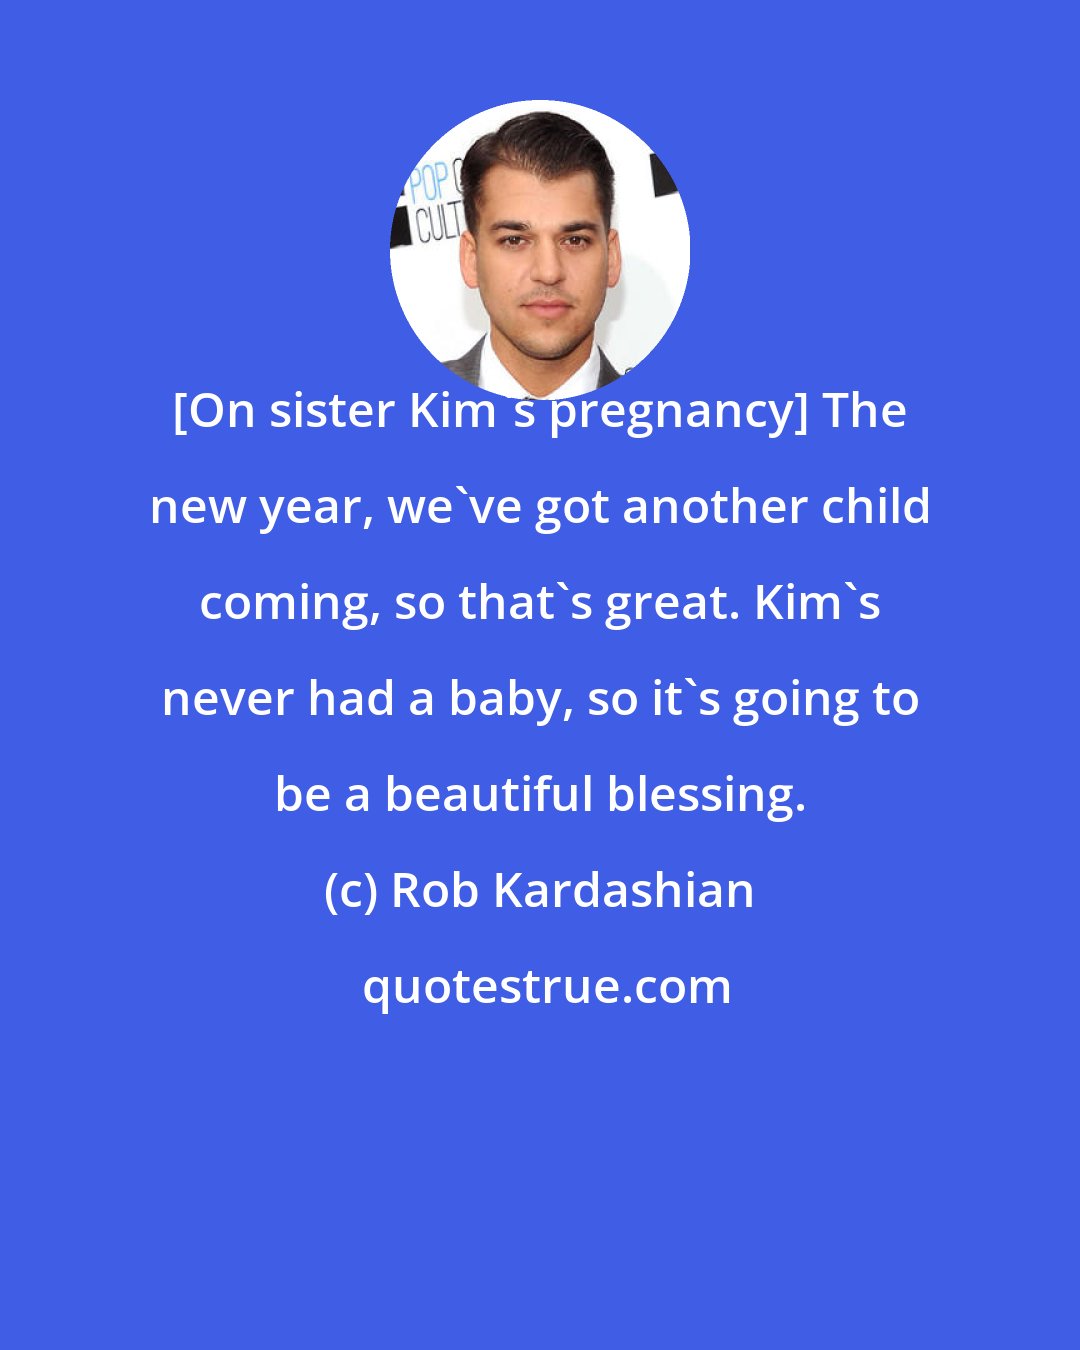 Rob Kardashian: [On sister Kim's pregnancy] The new year, we've got another child coming, so that's great. Kim's never had a baby, so it's going to be a beautiful blessing.